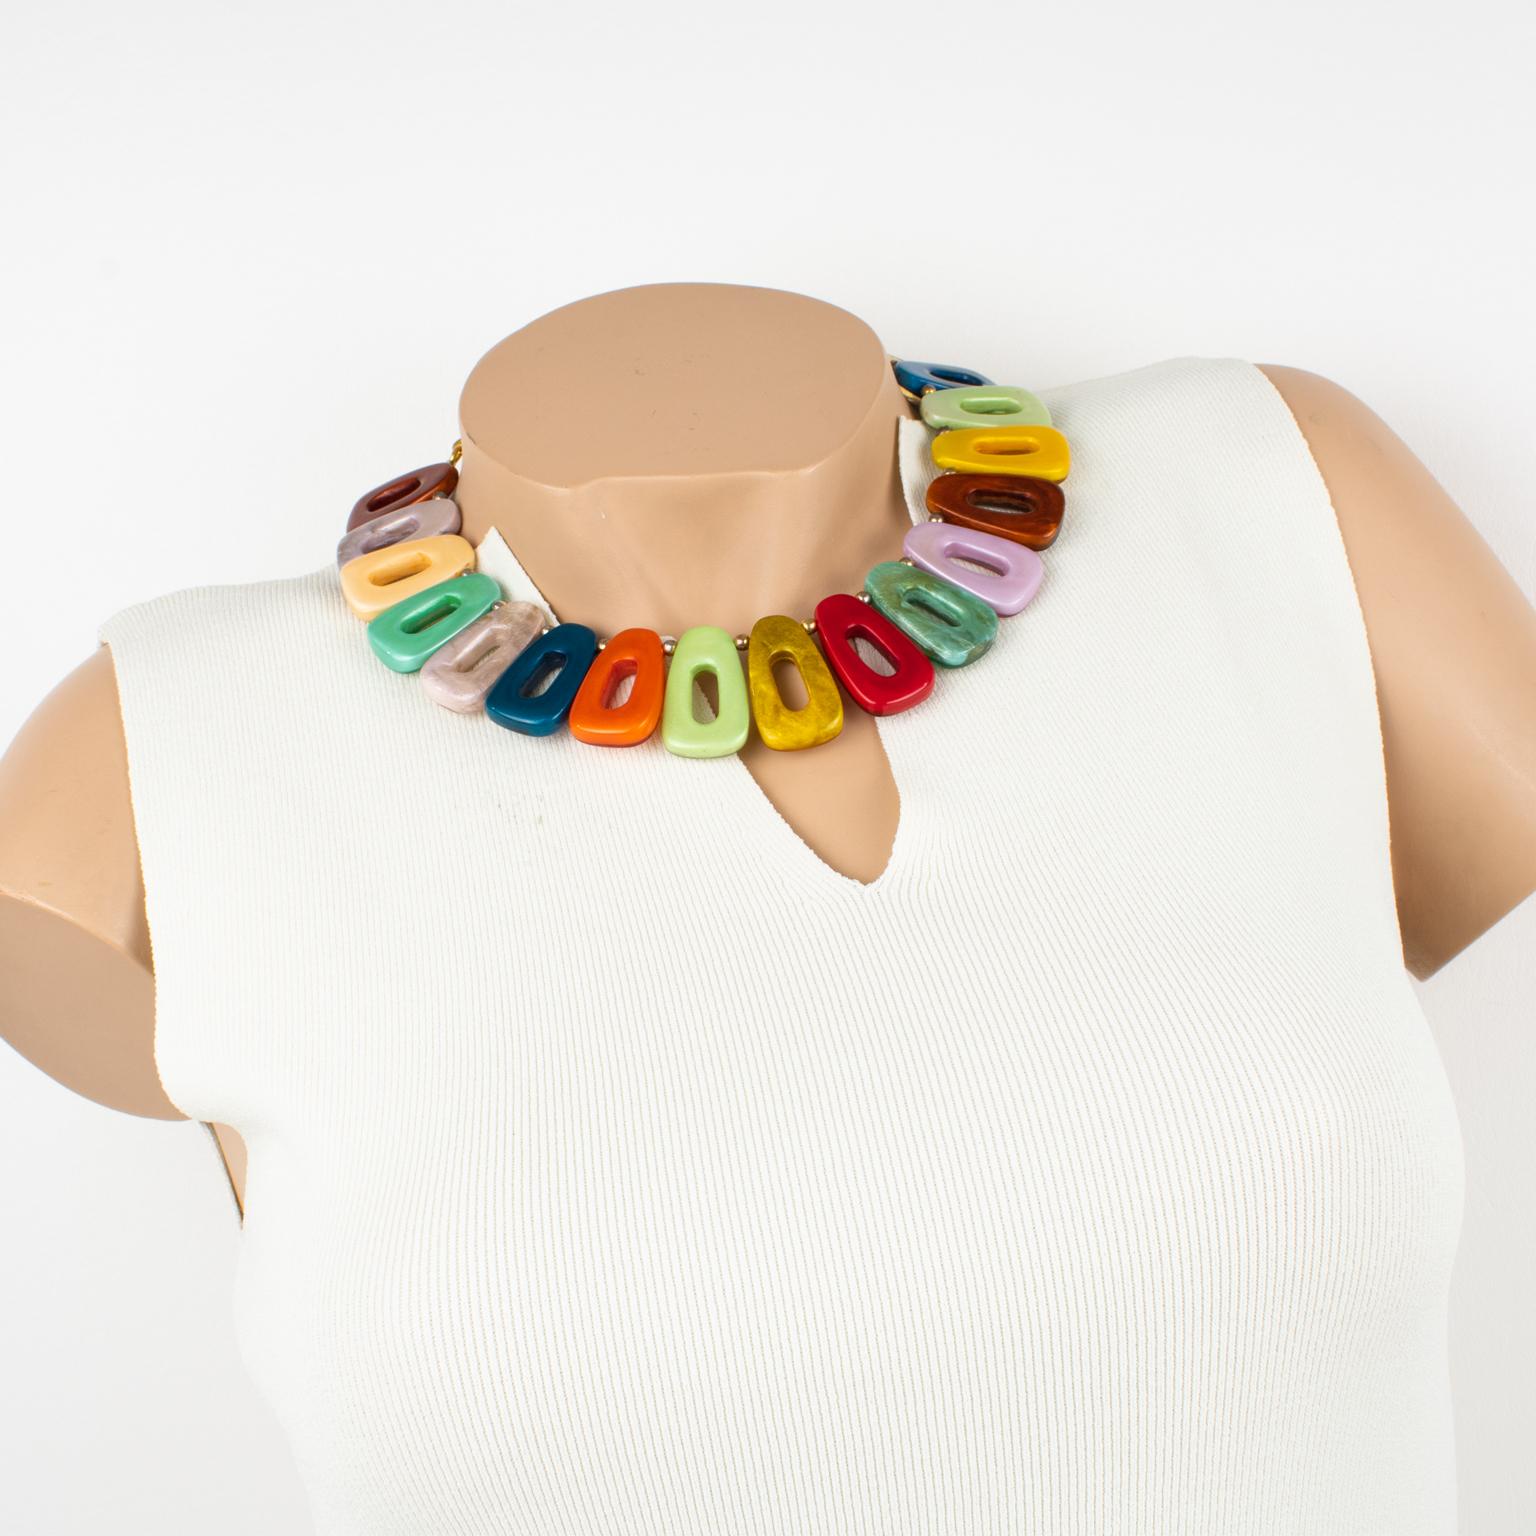 Stunning Dominique Denaive Paris choker necklace. Statement design with resin and gilt metal chain ornate with textured resin donut-pebble elements. Vivid multicolor tutti frutti pearlized tones. Lobster closing clasp with extra gilt metal chain for